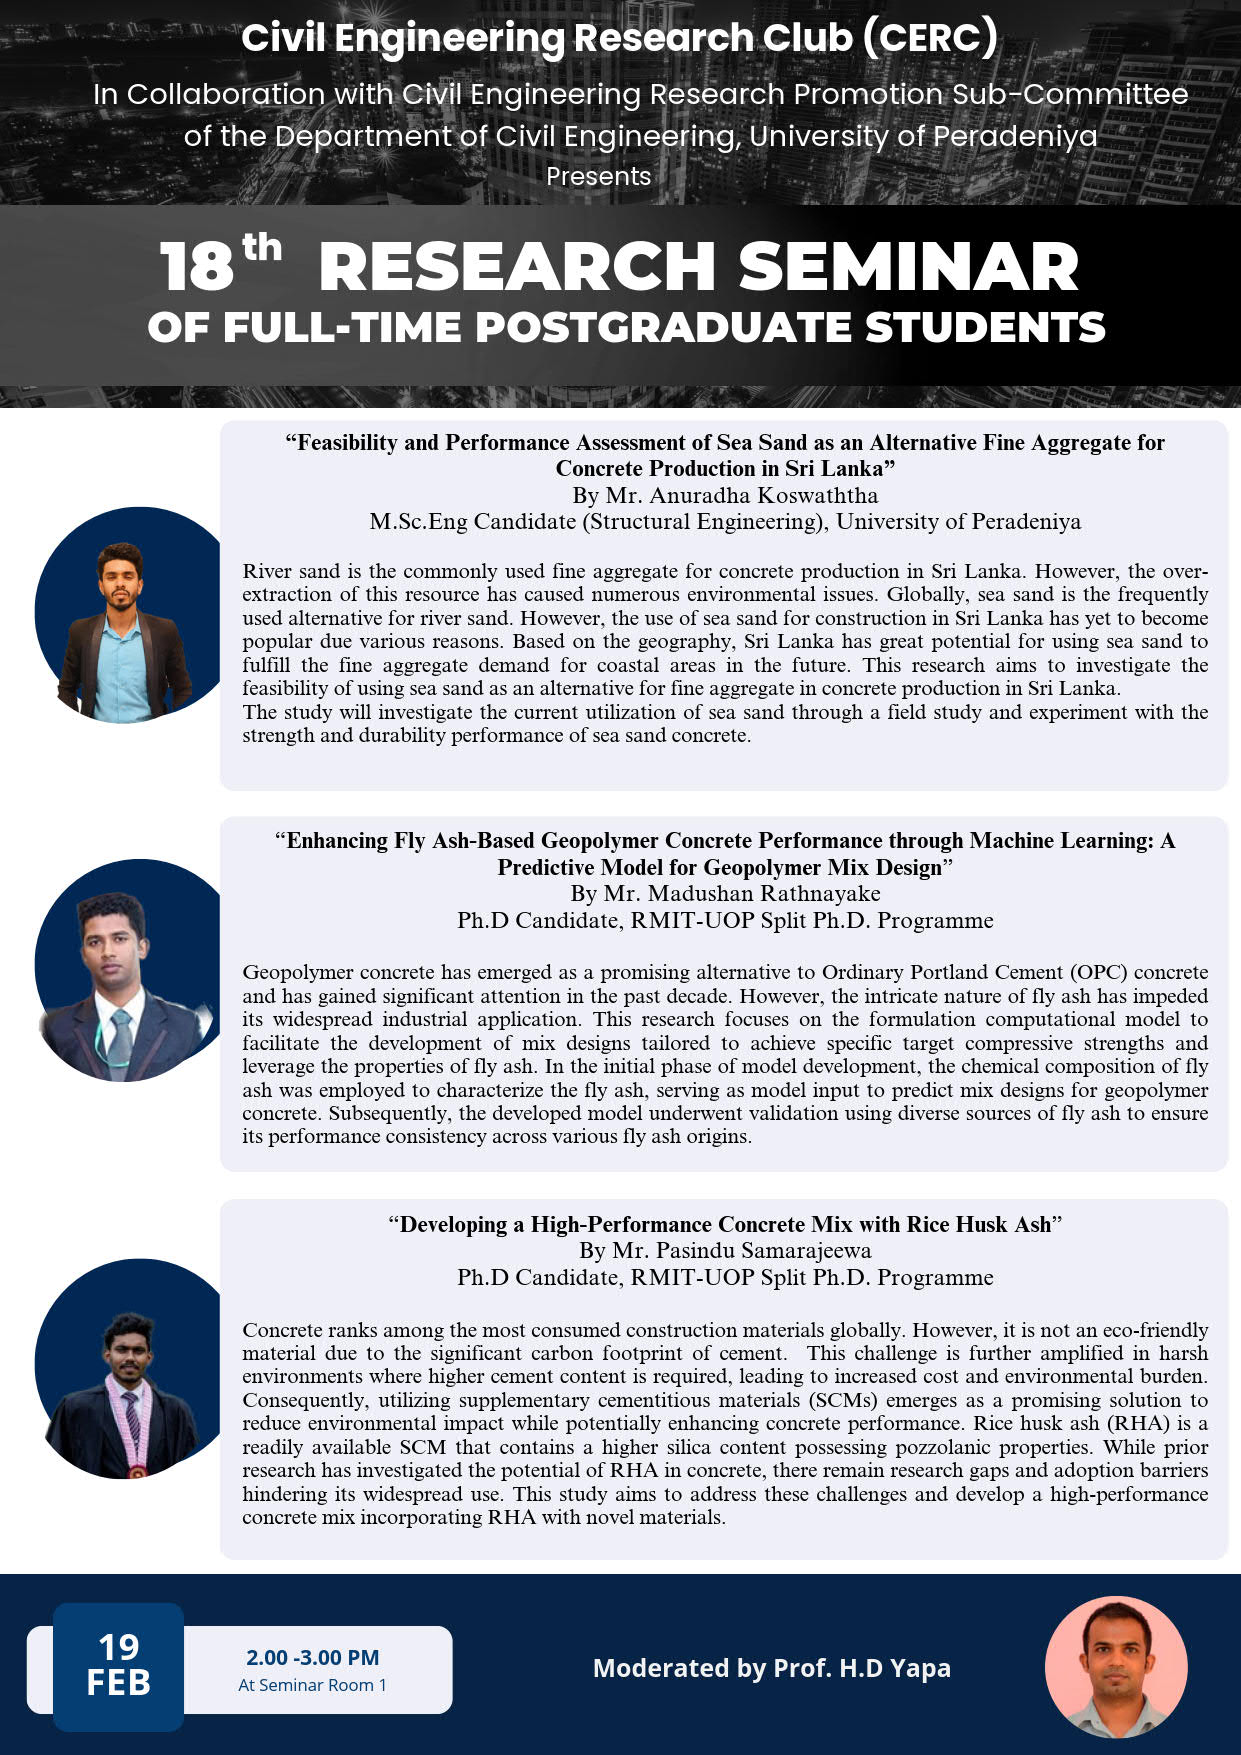 Civil Engineering 
            Research Club (CERC) 18th Research Seminar of Full-Time Postgraduate Students 